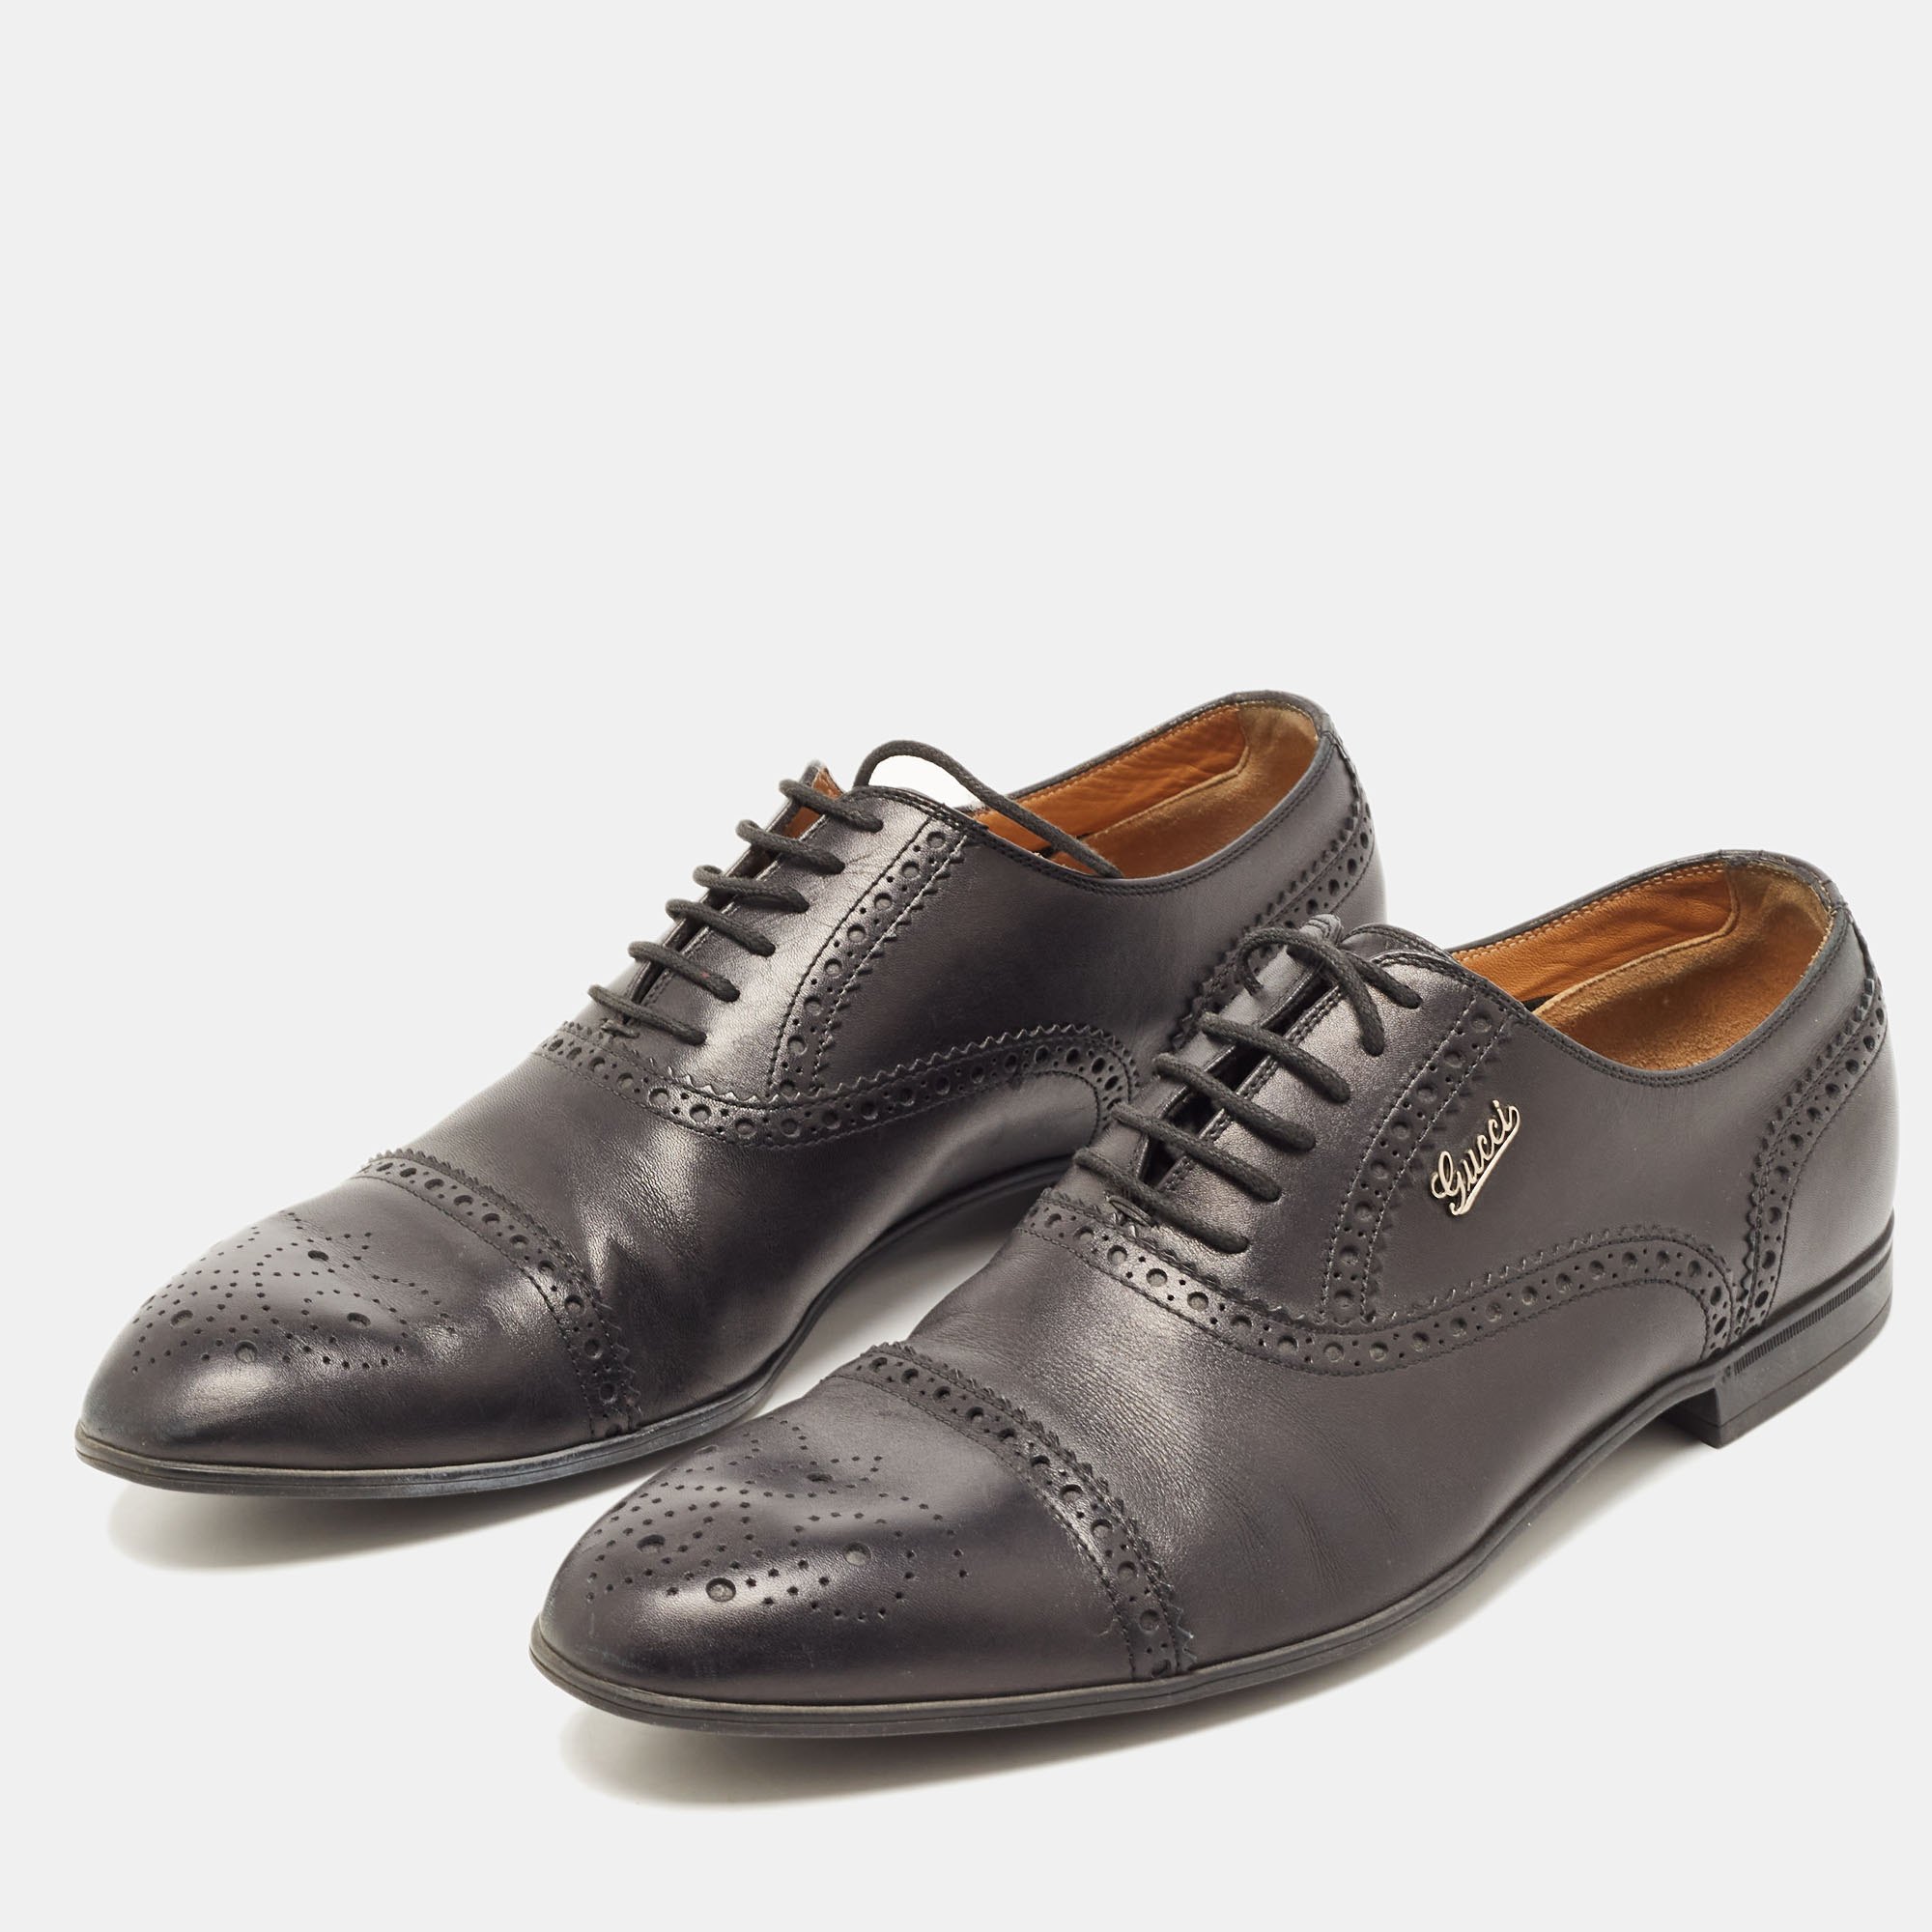 

Gucci Black Leather Brogue Lace Up Oxfords Size